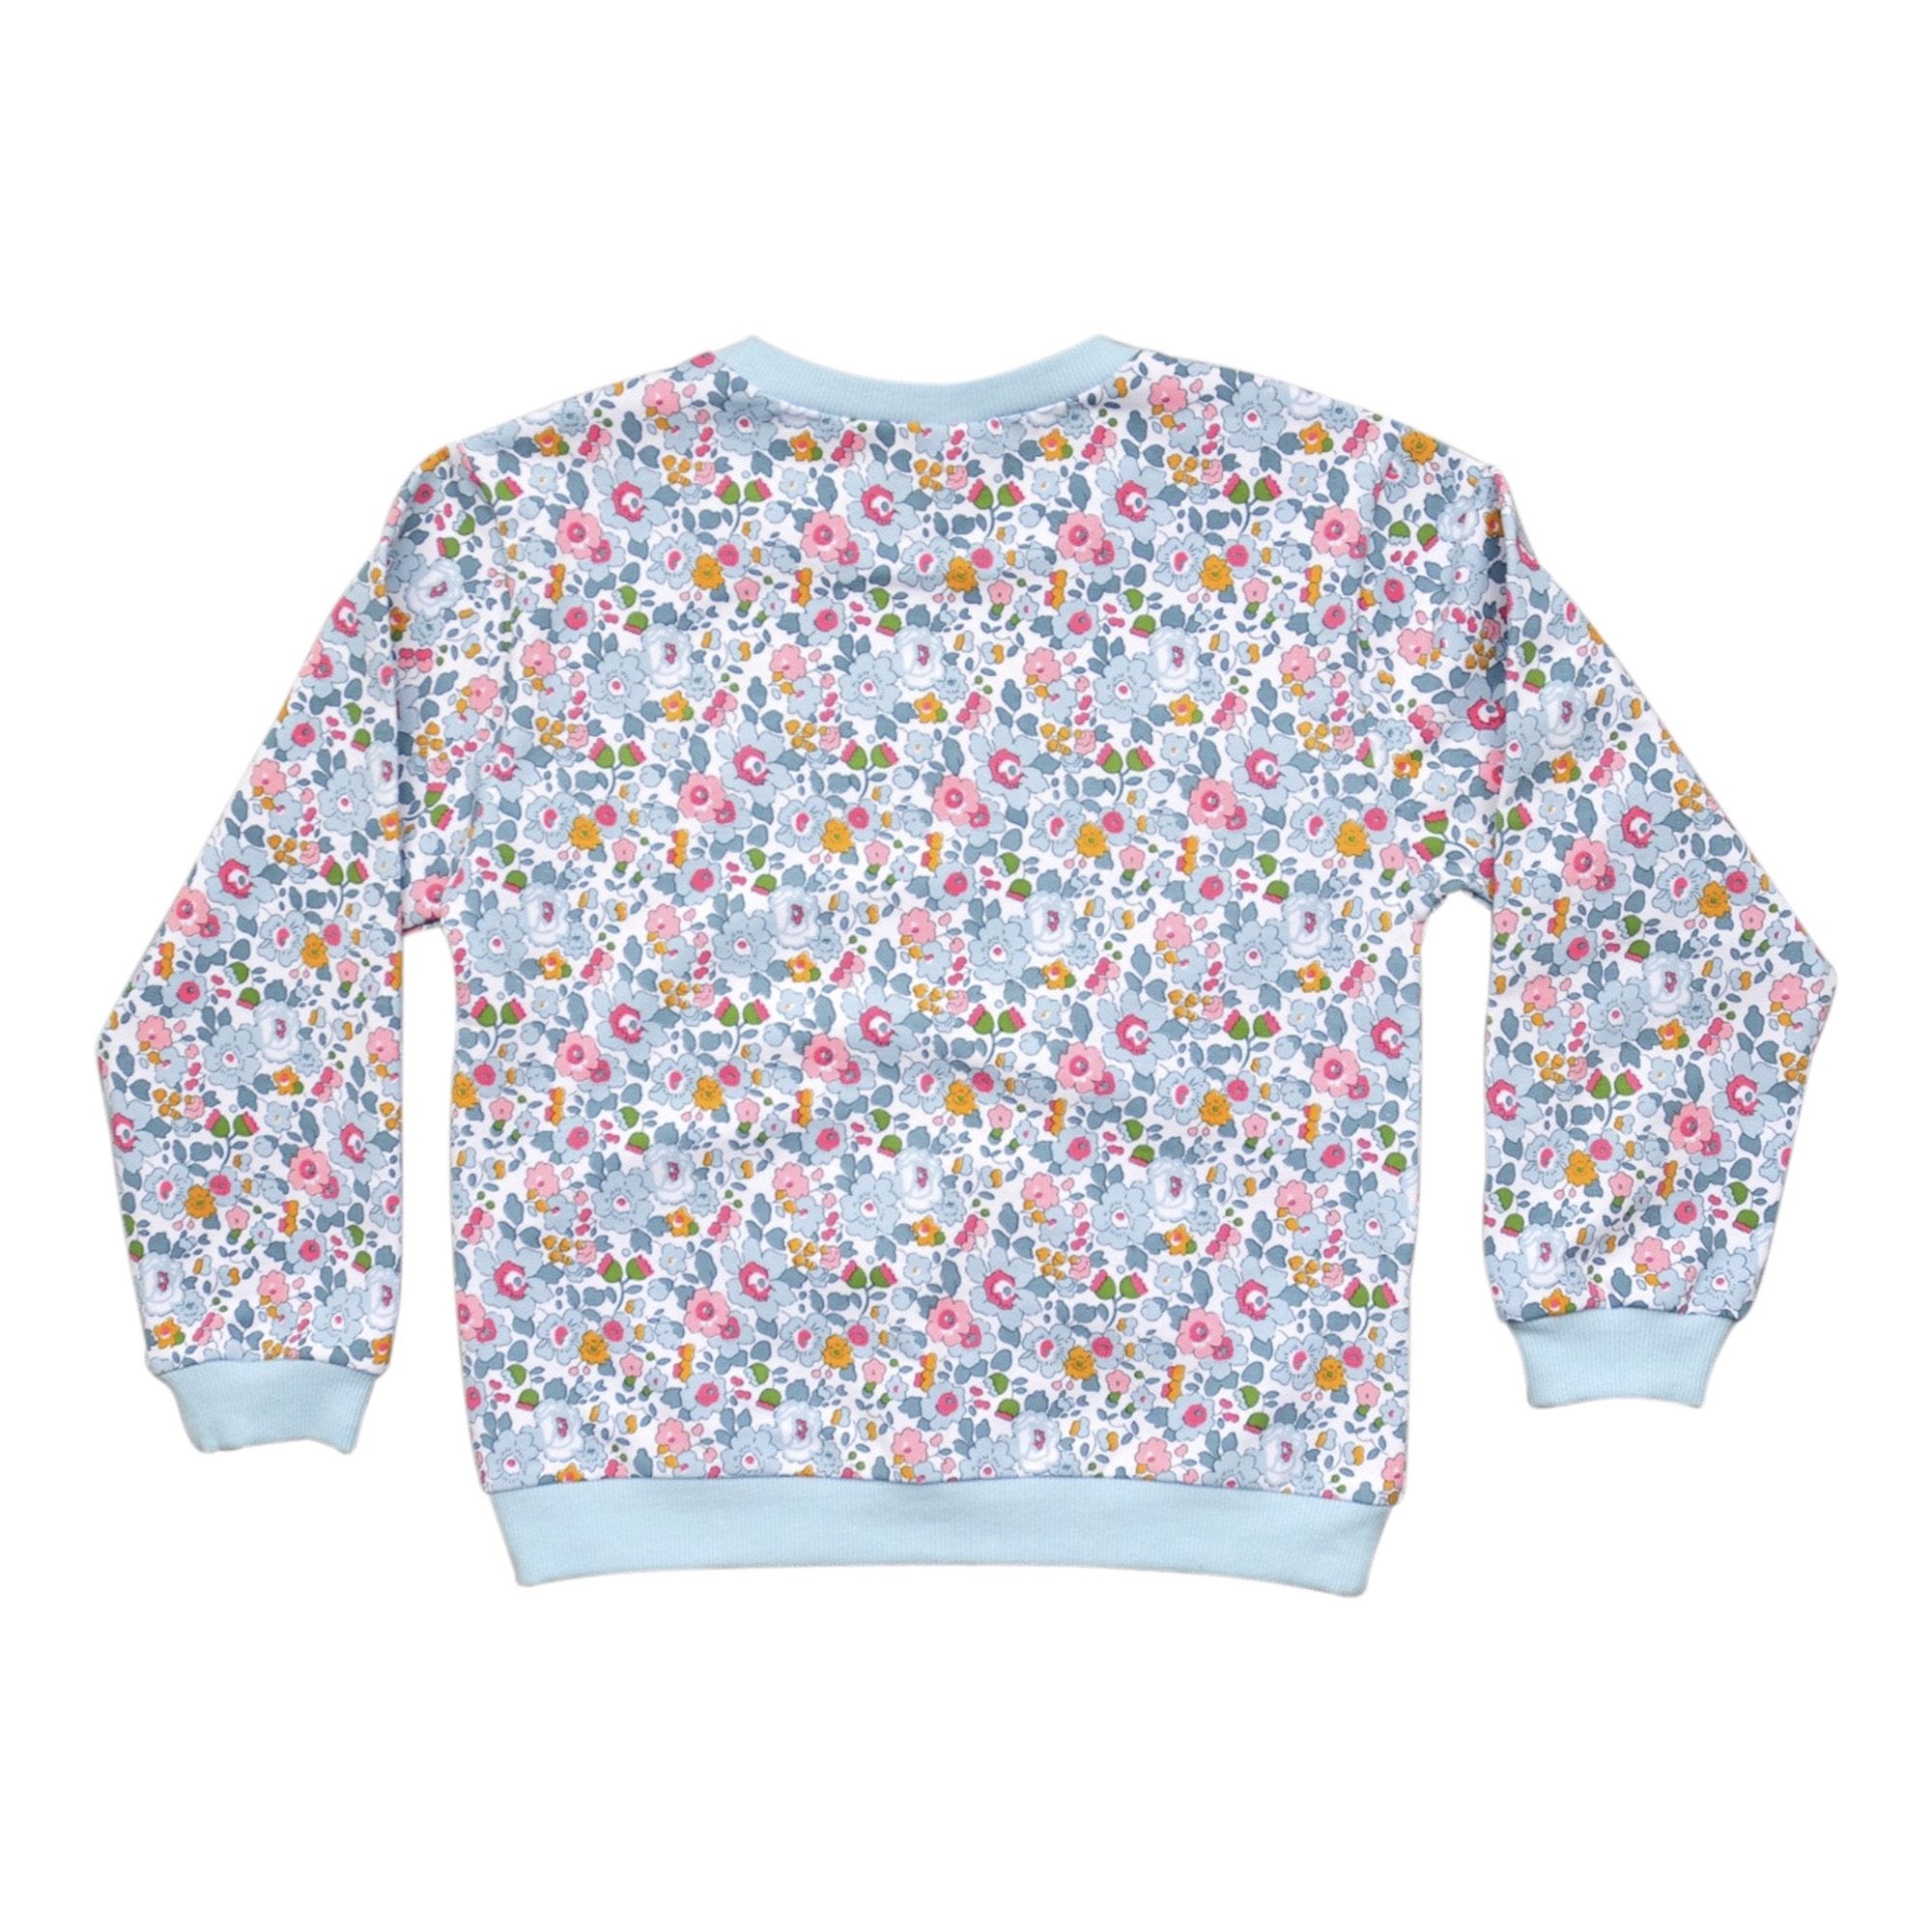 Bessie Pale Blue Liberty Print Sweater - Cou Cou Baby